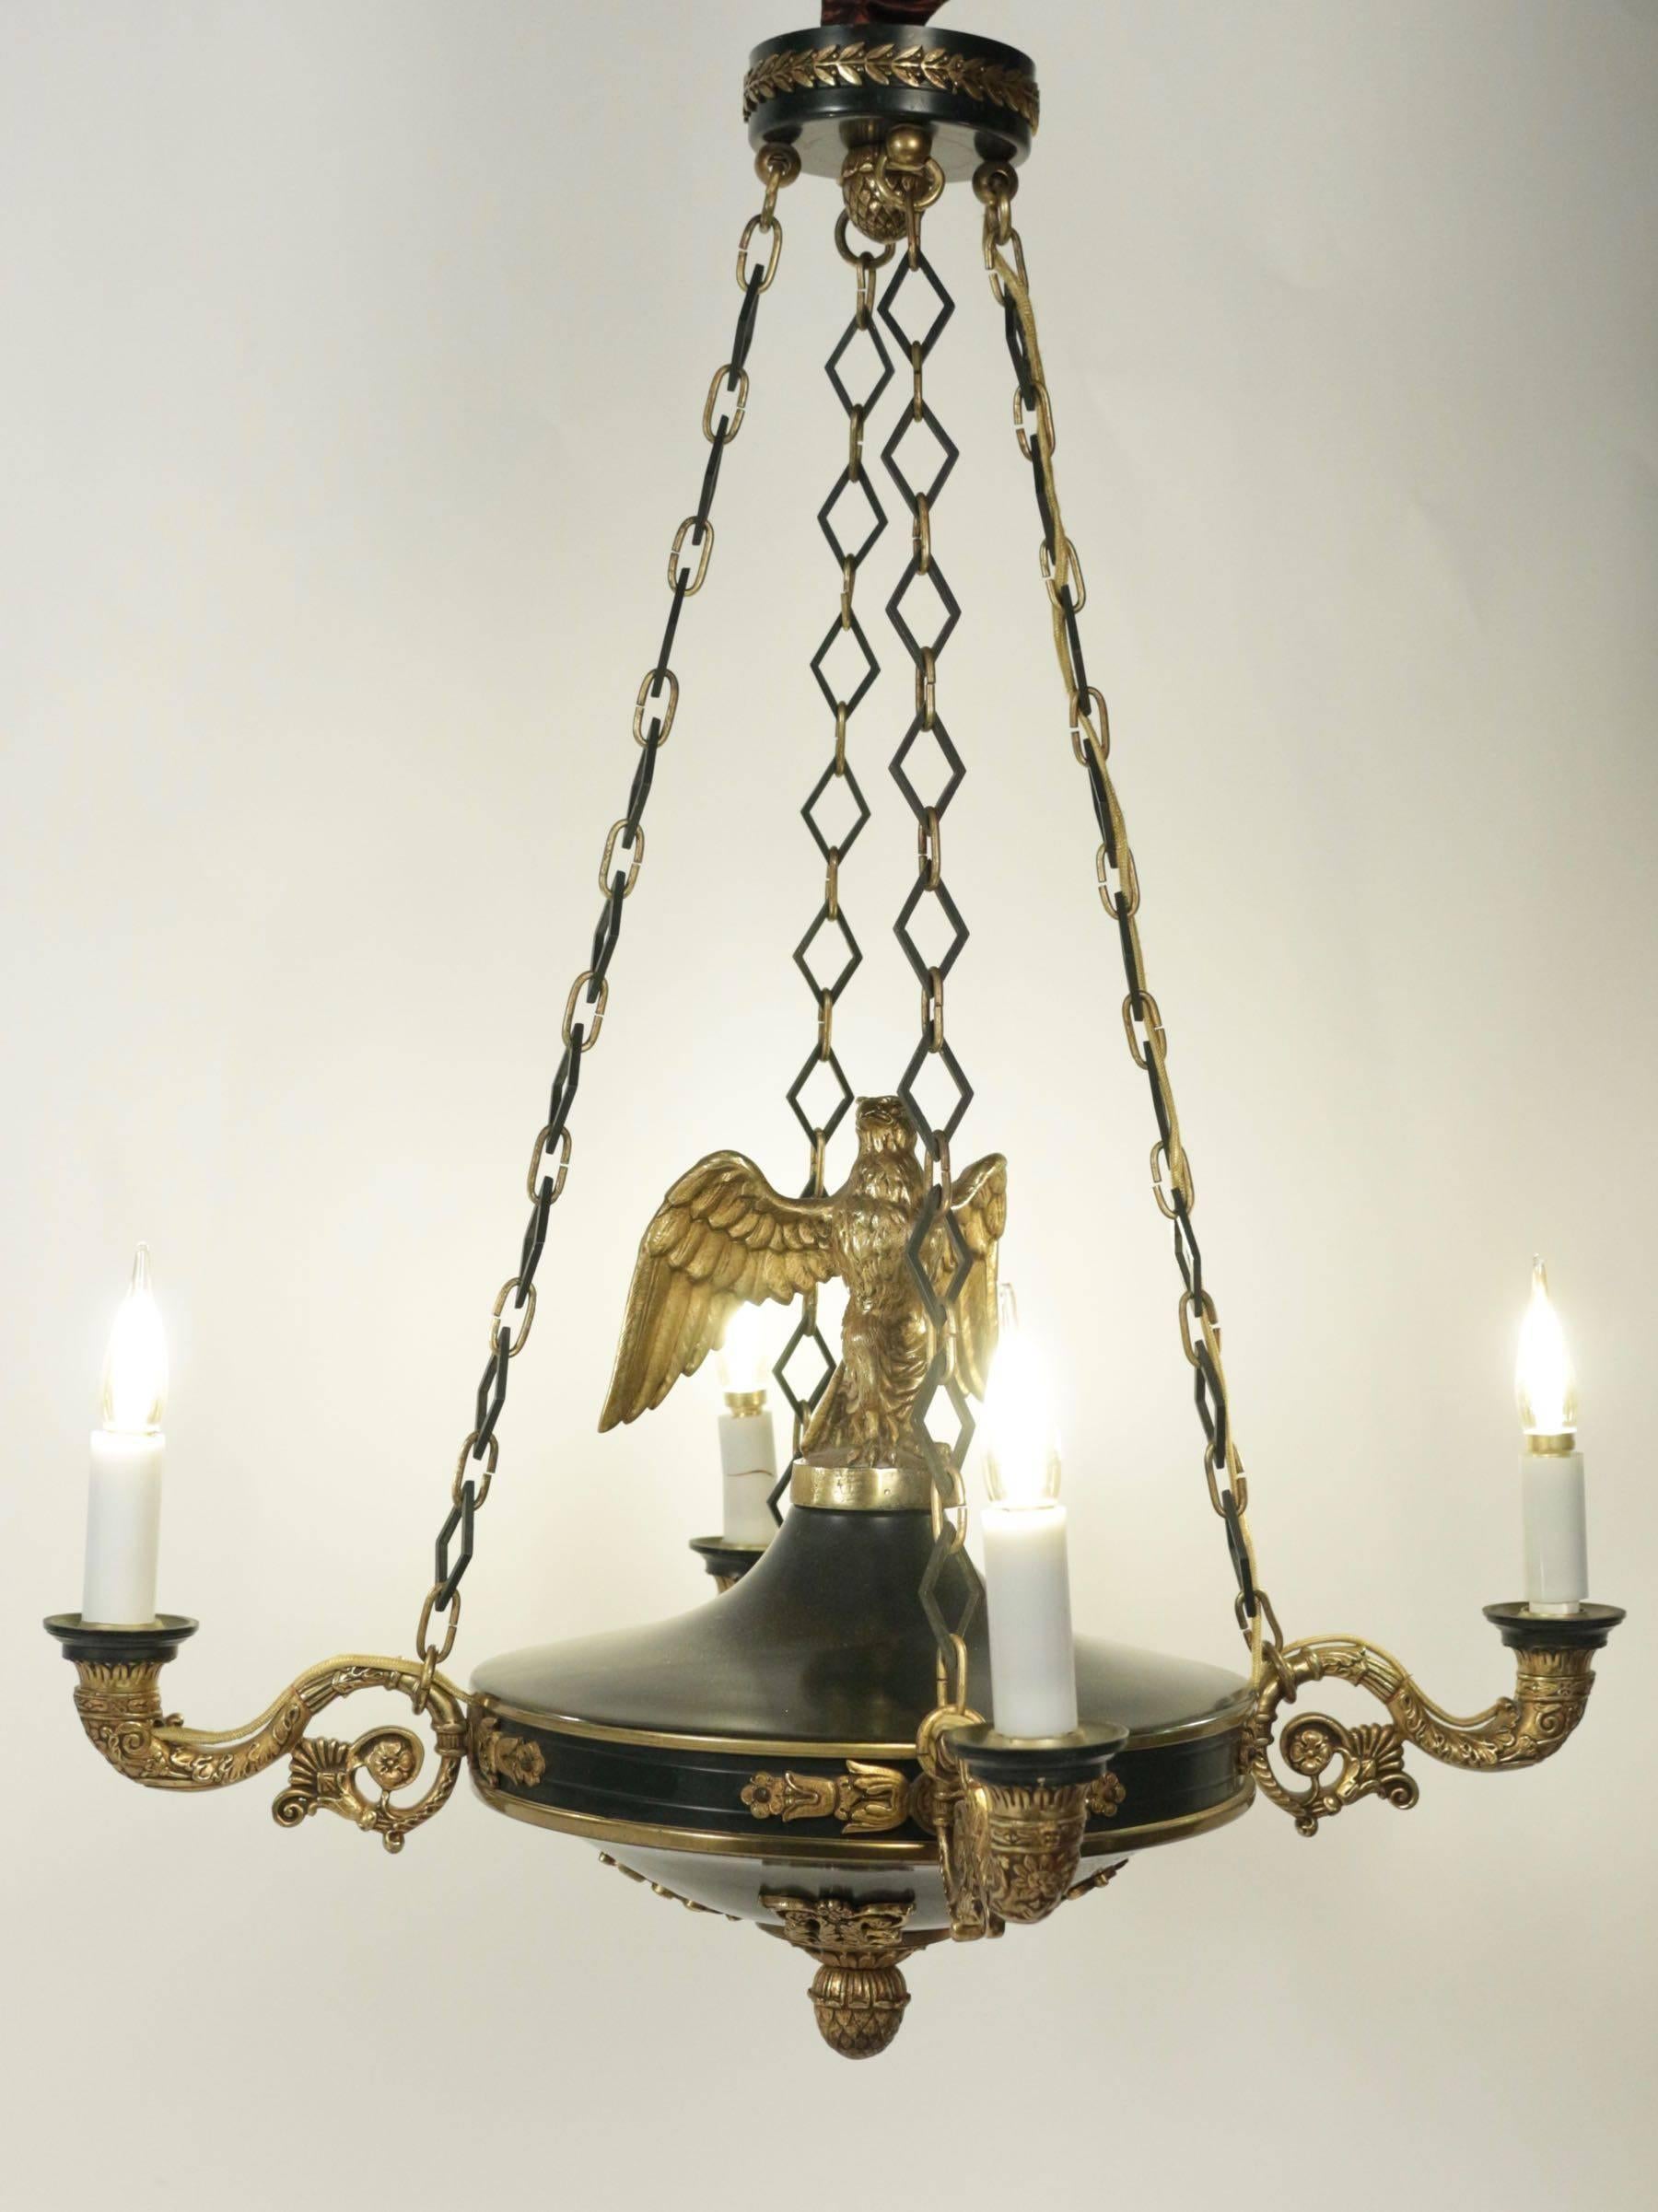 Chandelier Empire style with an eagle in gold gilt bronze, 19th century. Four arms.
    